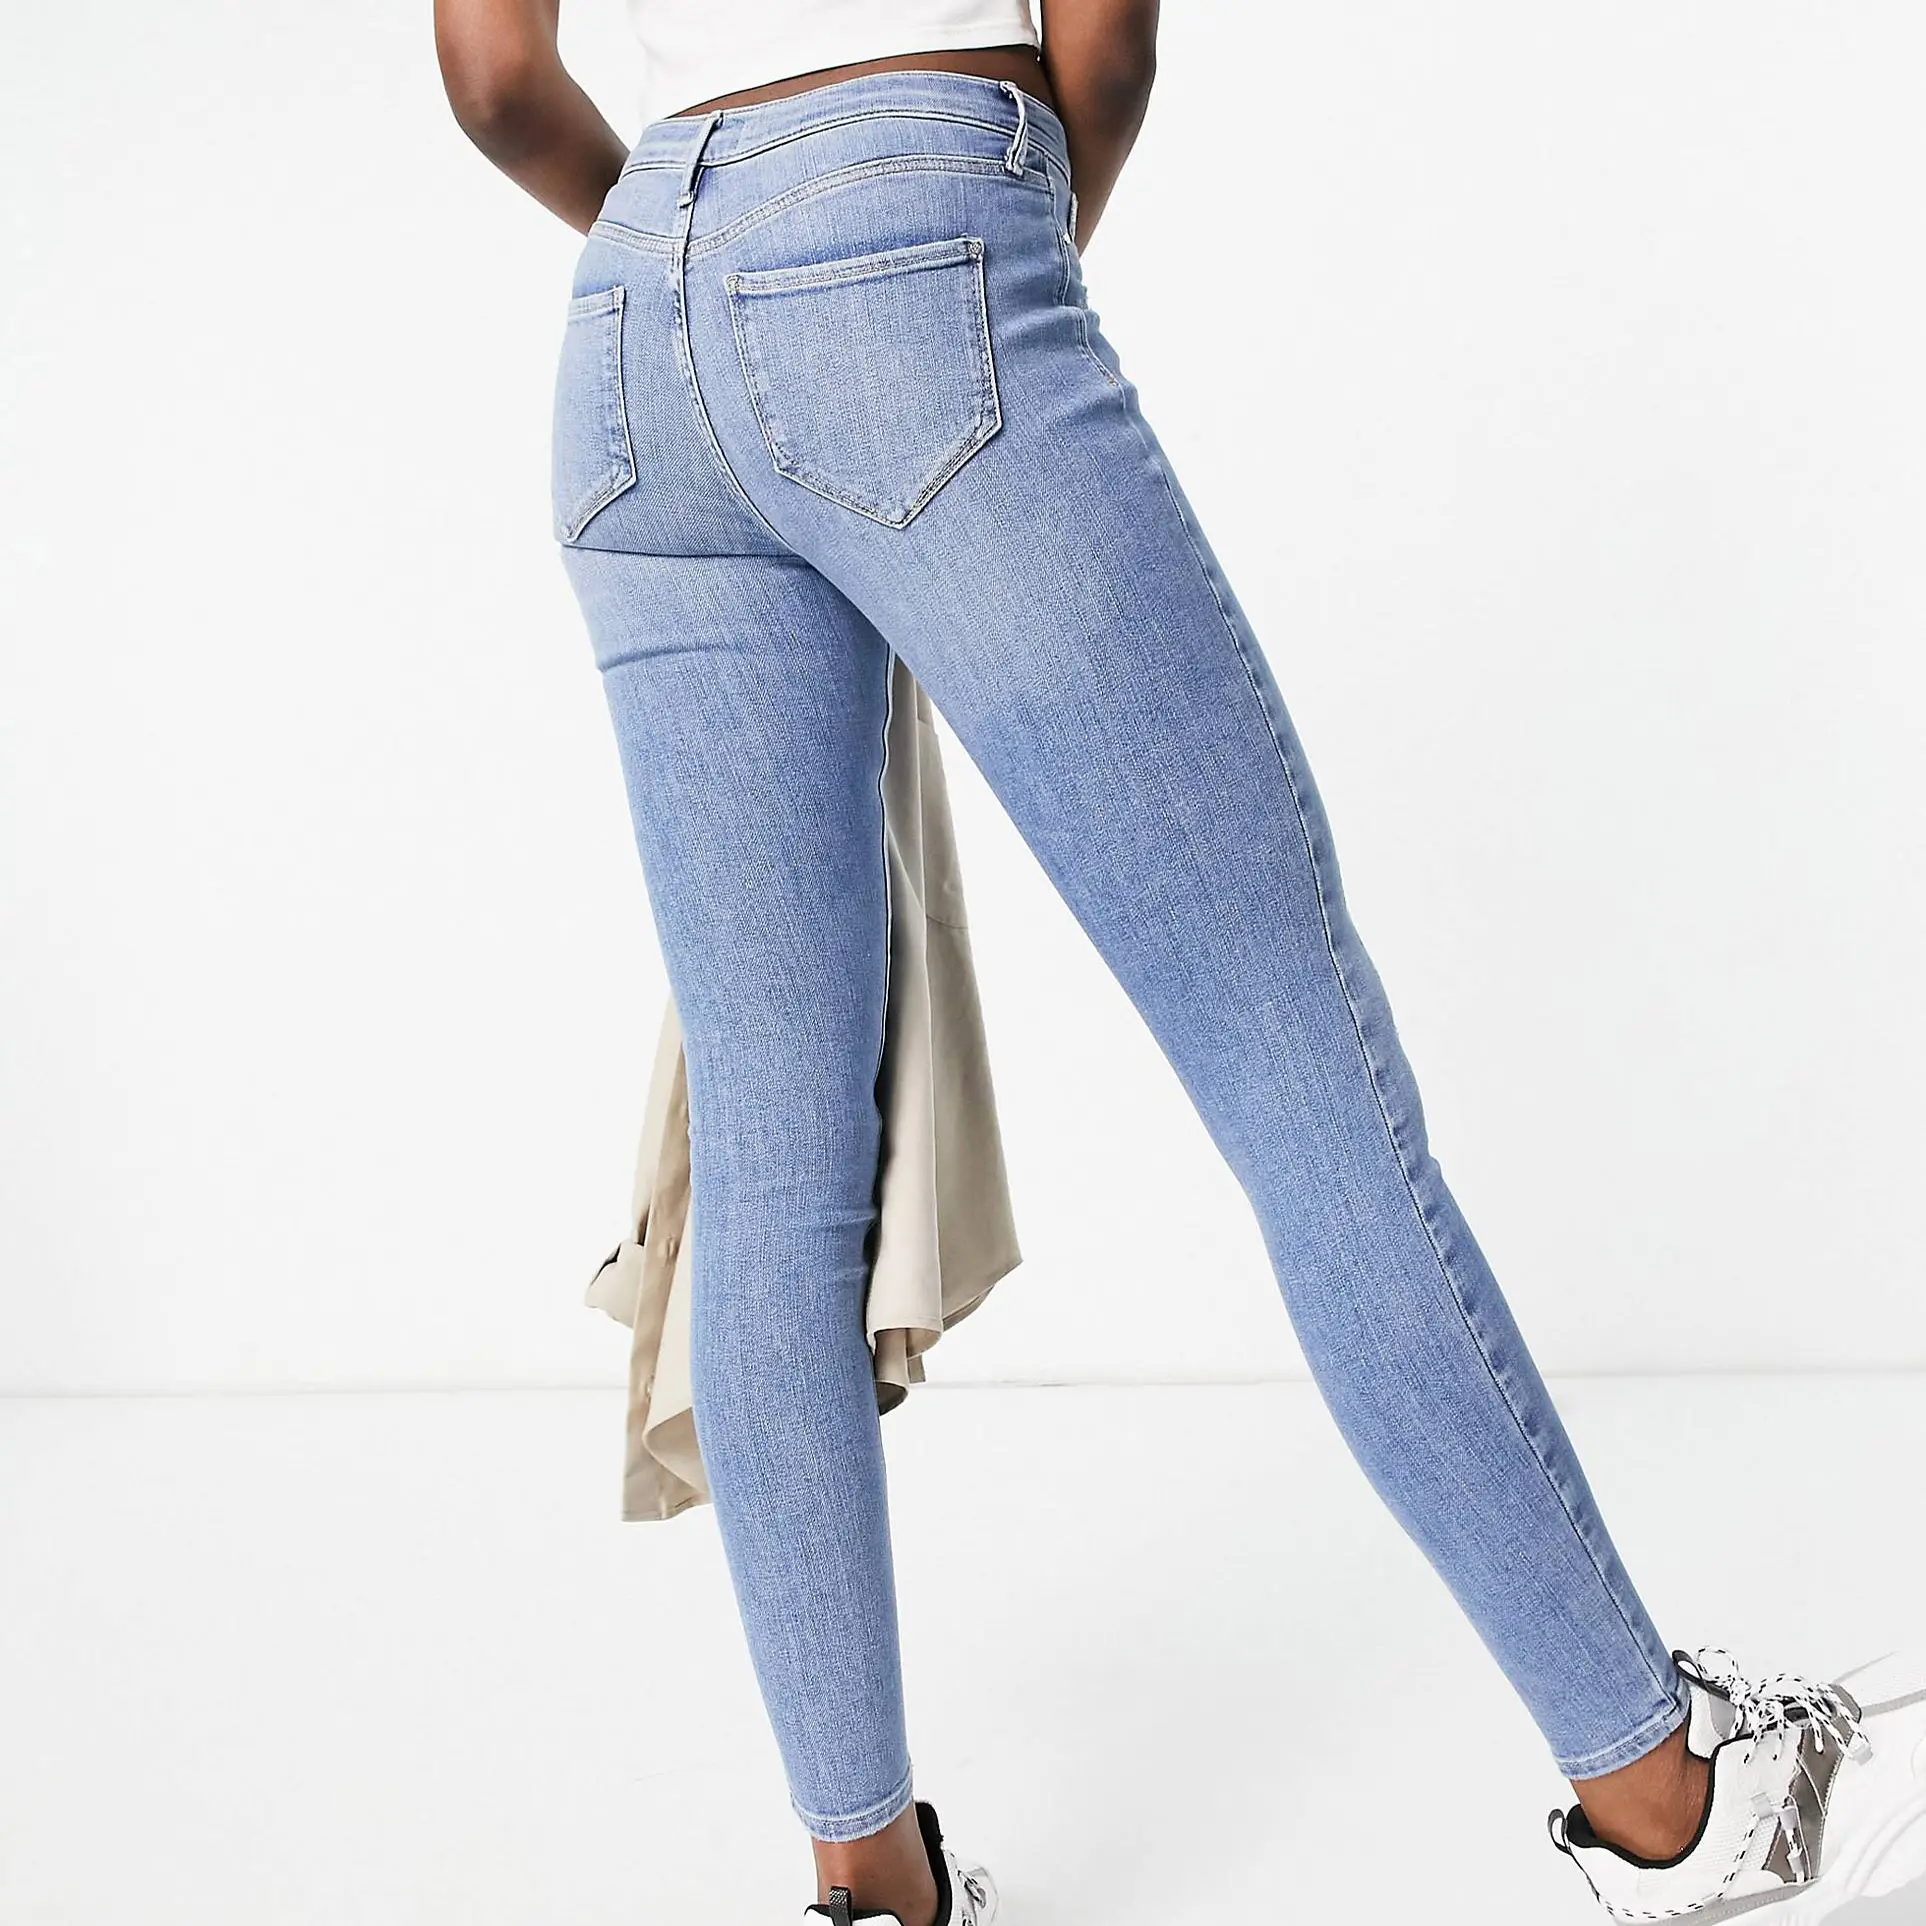 River Island Tall Molly washed skinny jeans in mid blue